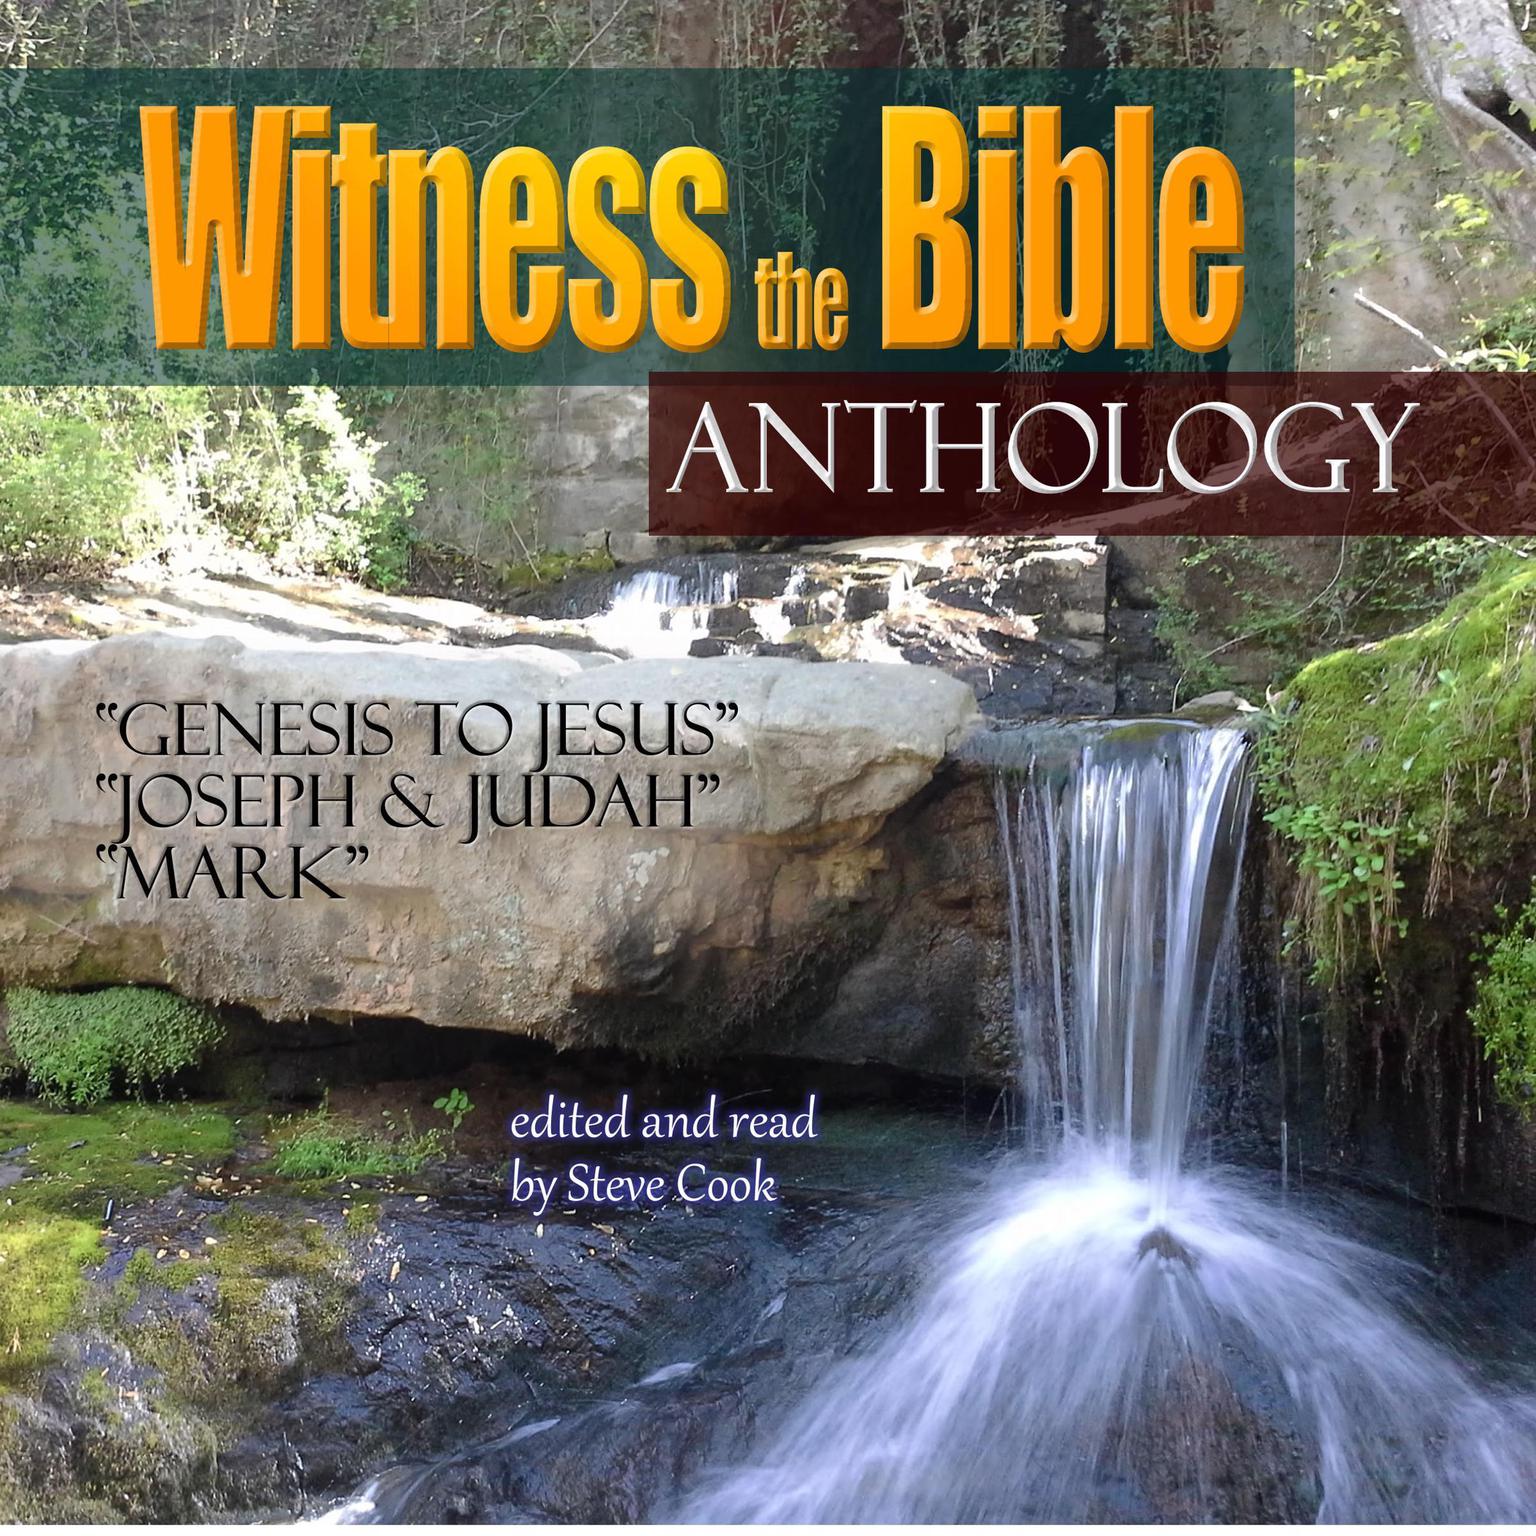 Witness the Bible (Abridged): Anthology Audiobook, by Various 